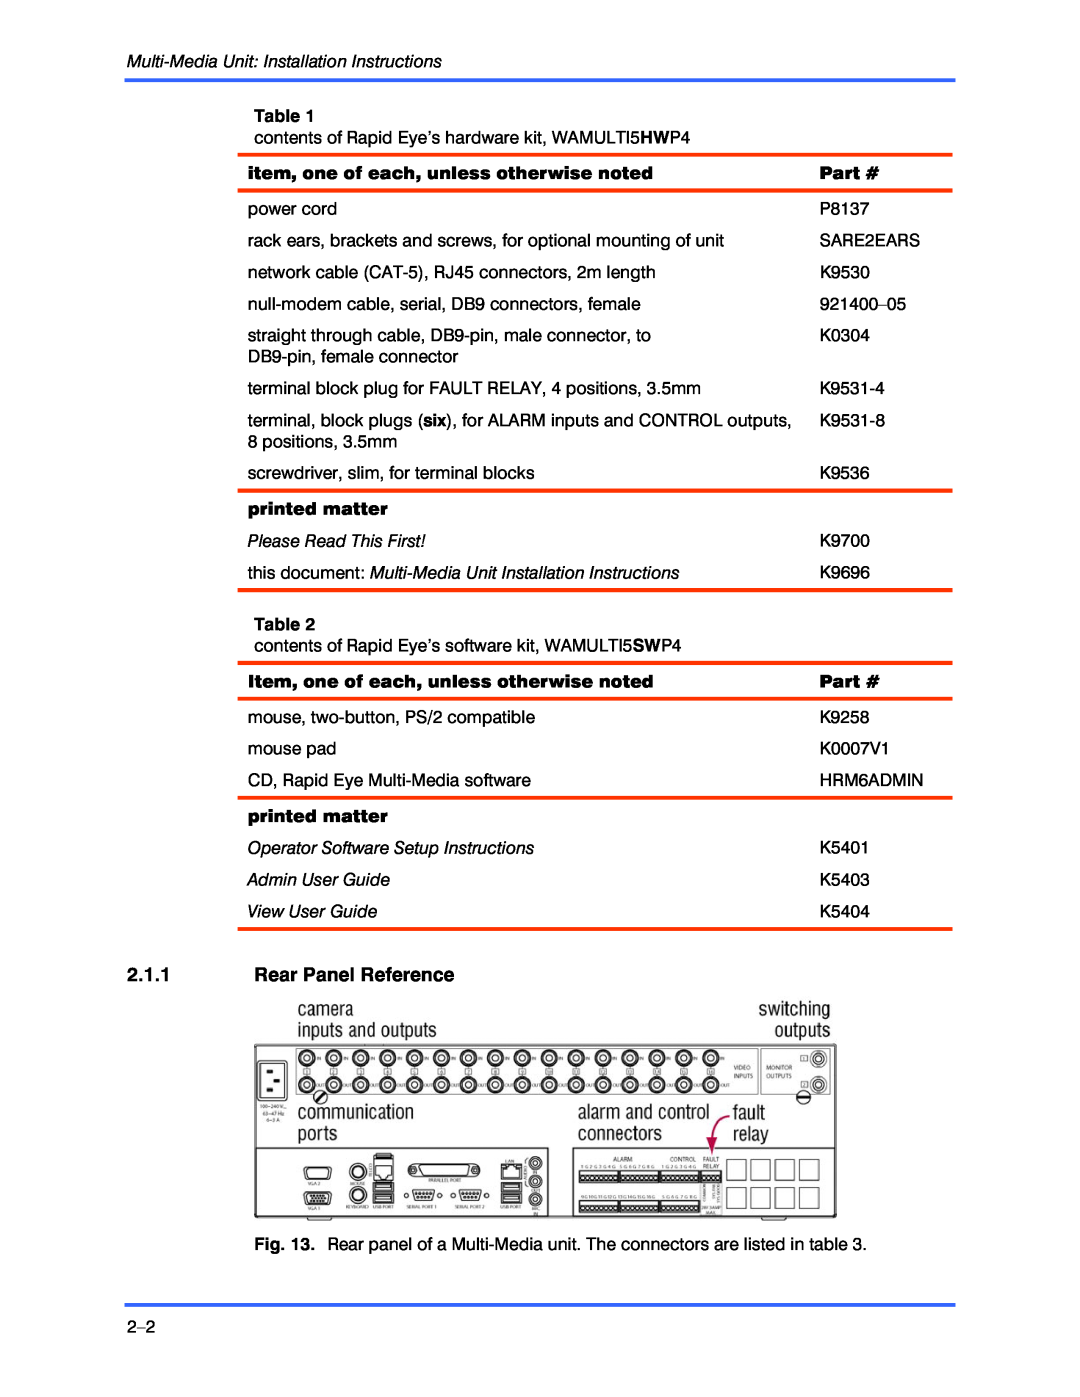 Honeywell K9696V2 2.1.1Rear Panel Reference, item, one of each, unless otherwise noted, Part #, printed matter, Table 